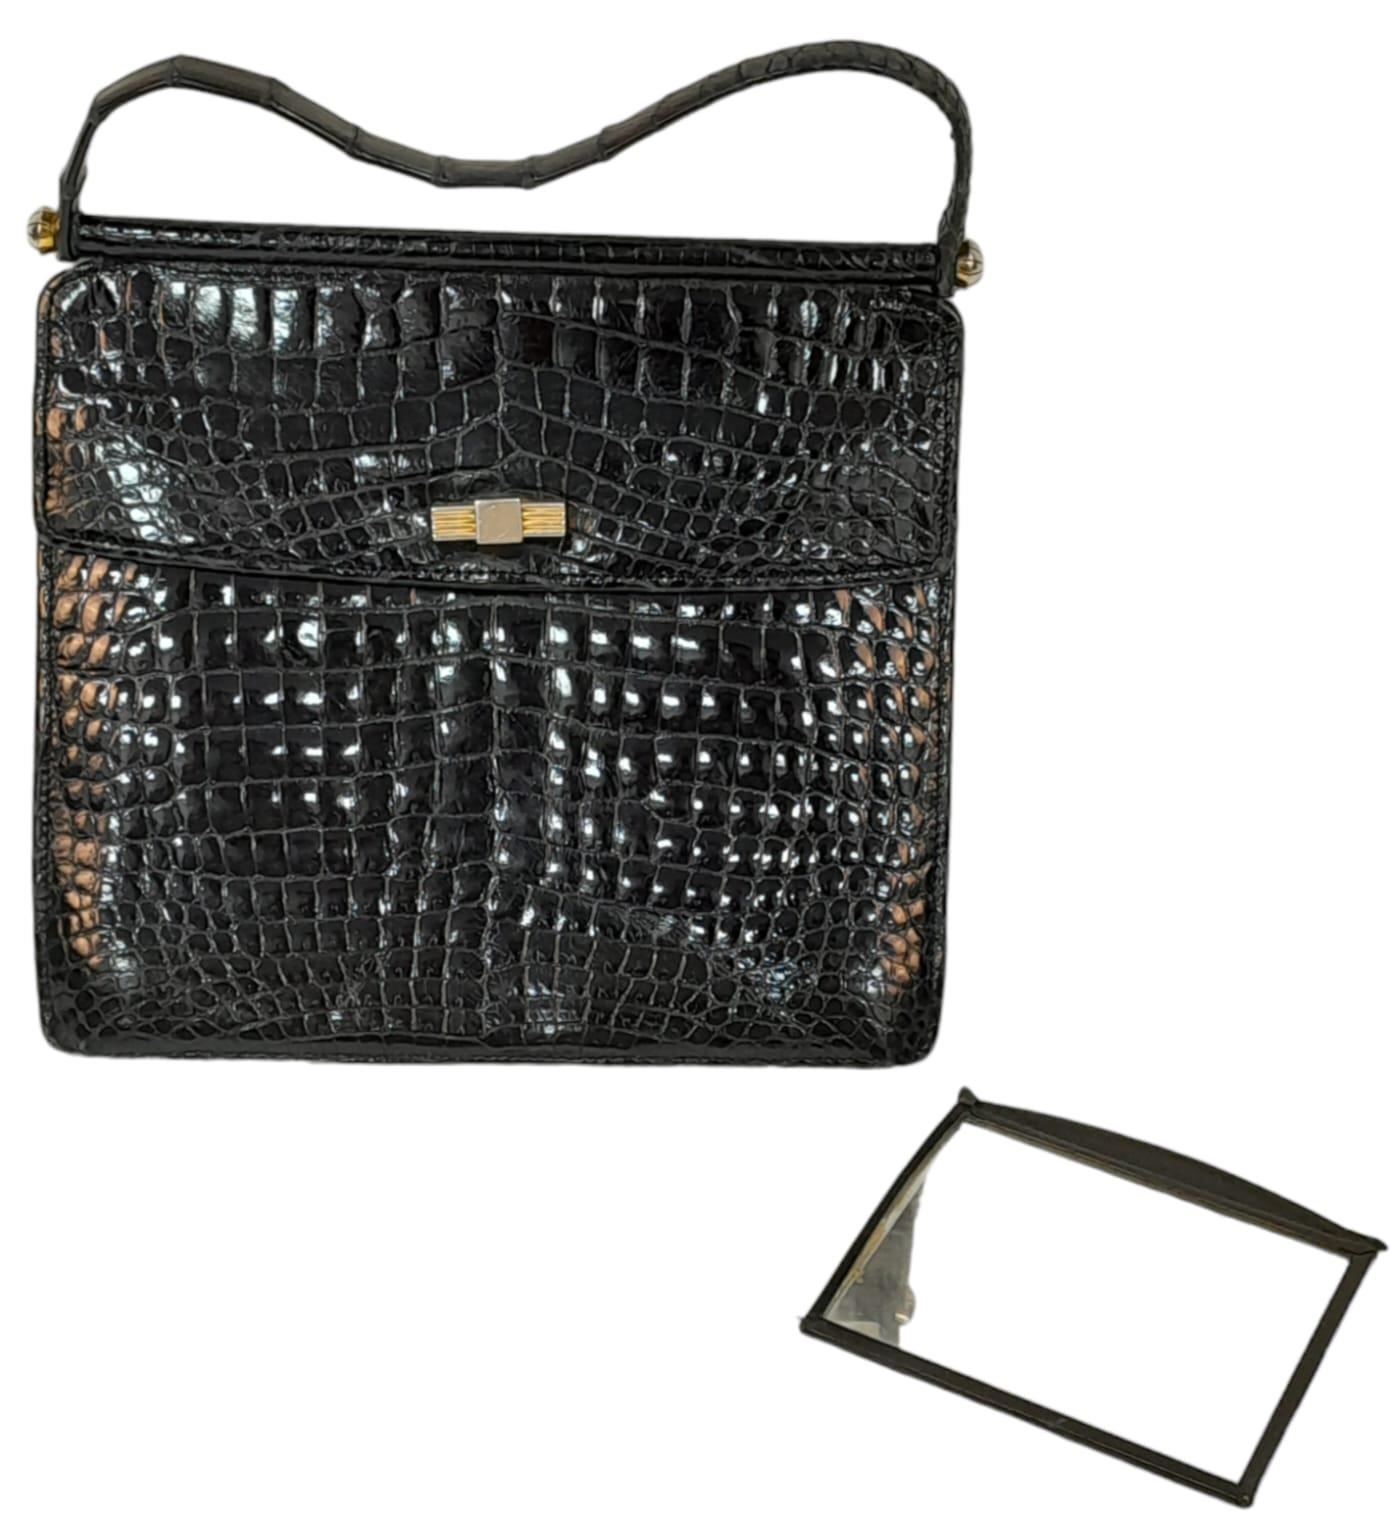 Two Crocodile Leather Hand Bags. Black crocodile bag has gold-toned hardware, a single strap and - Image 5 of 6